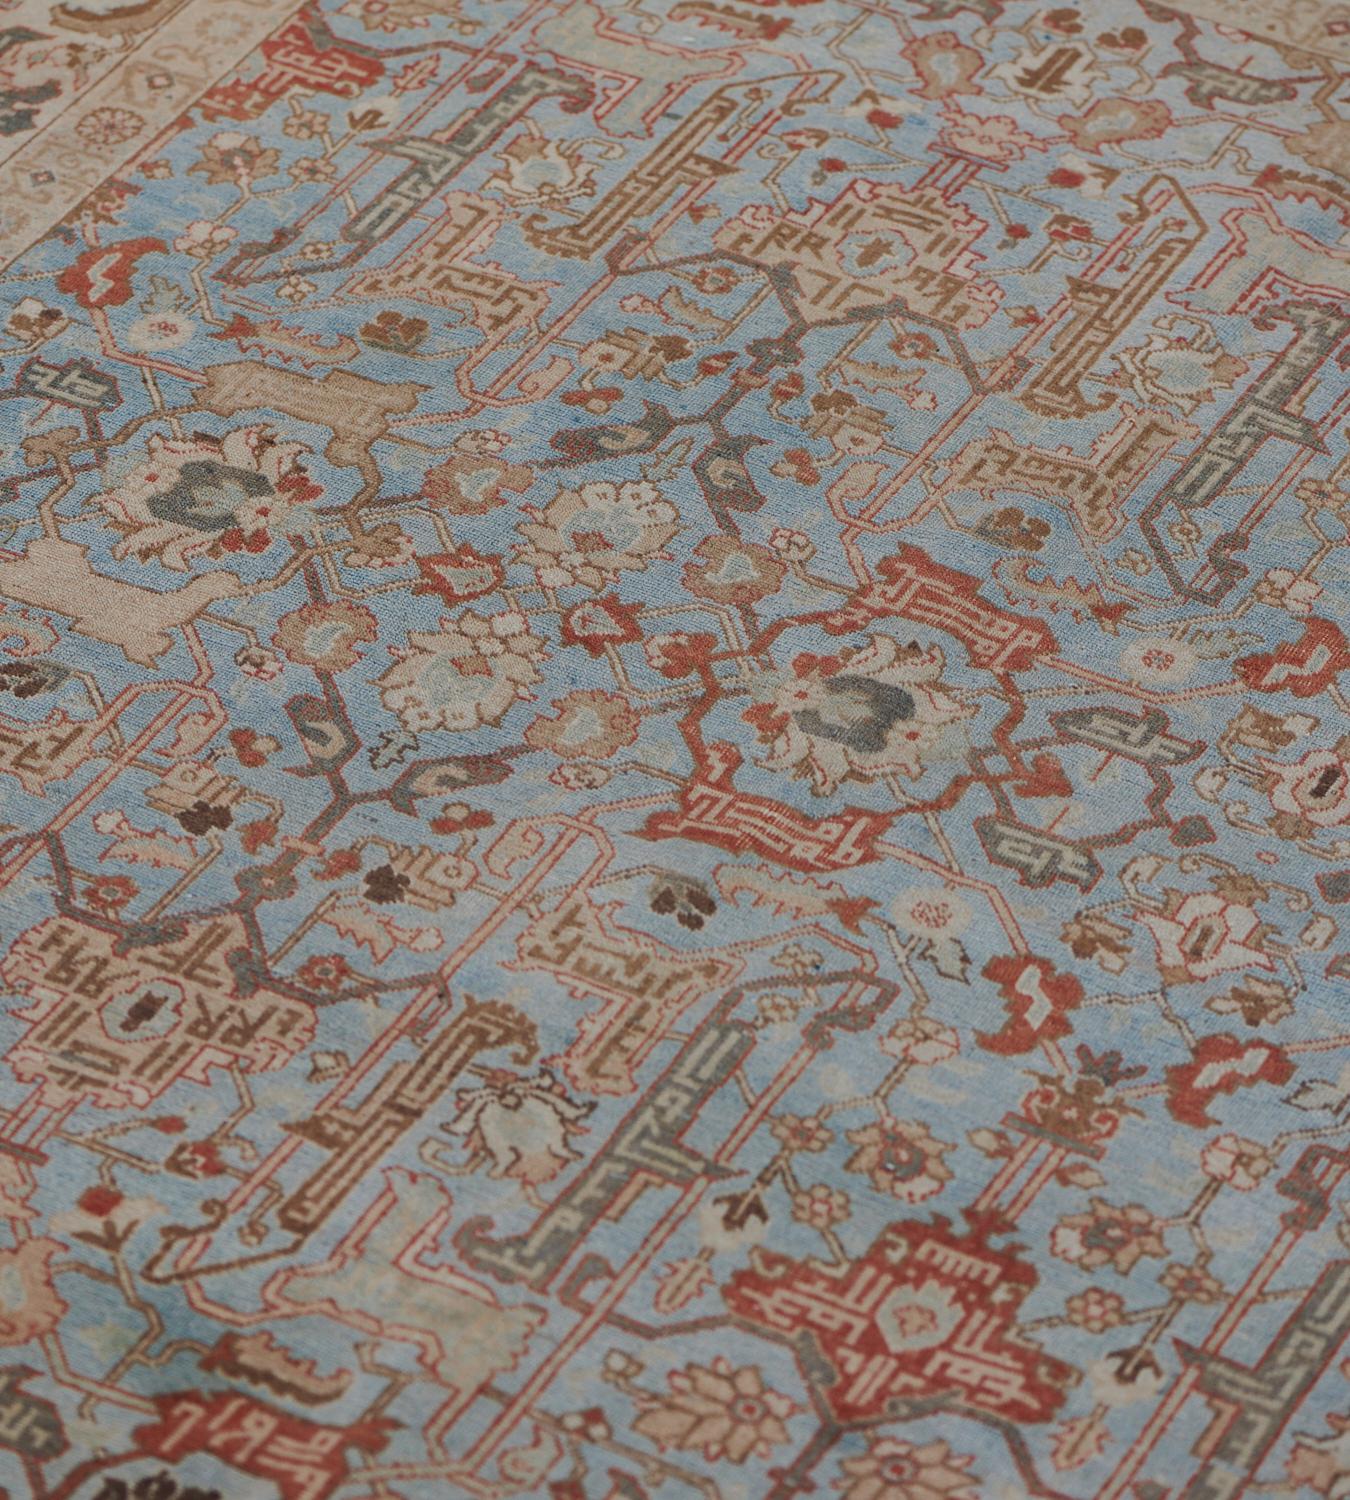 Circa 1920 Antique Tabriz Rug In Good Condition For Sale In West Hollywood, CA